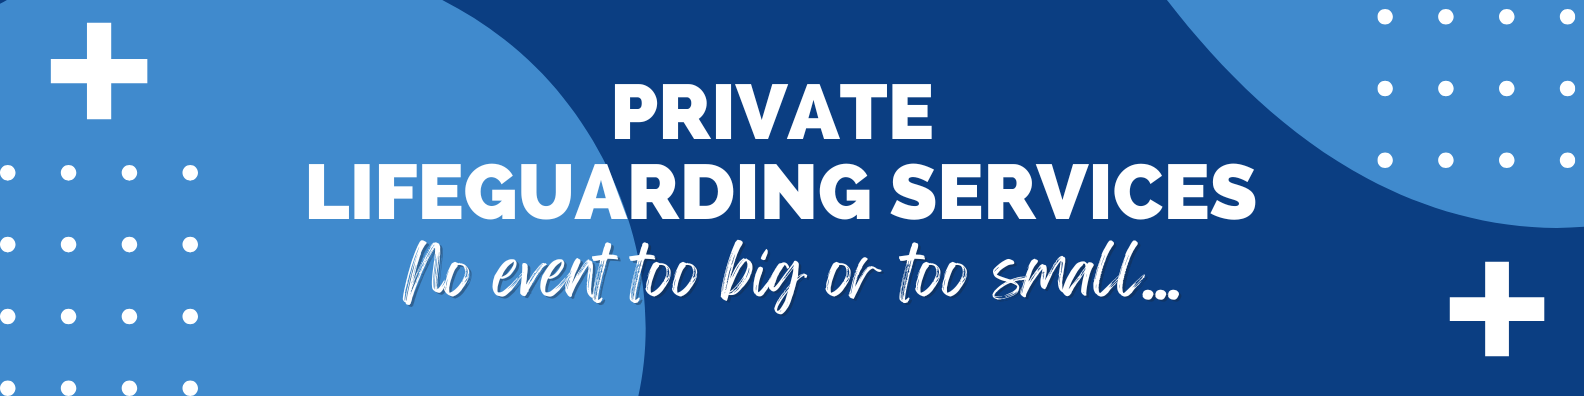 Private Lifeguarding services Website